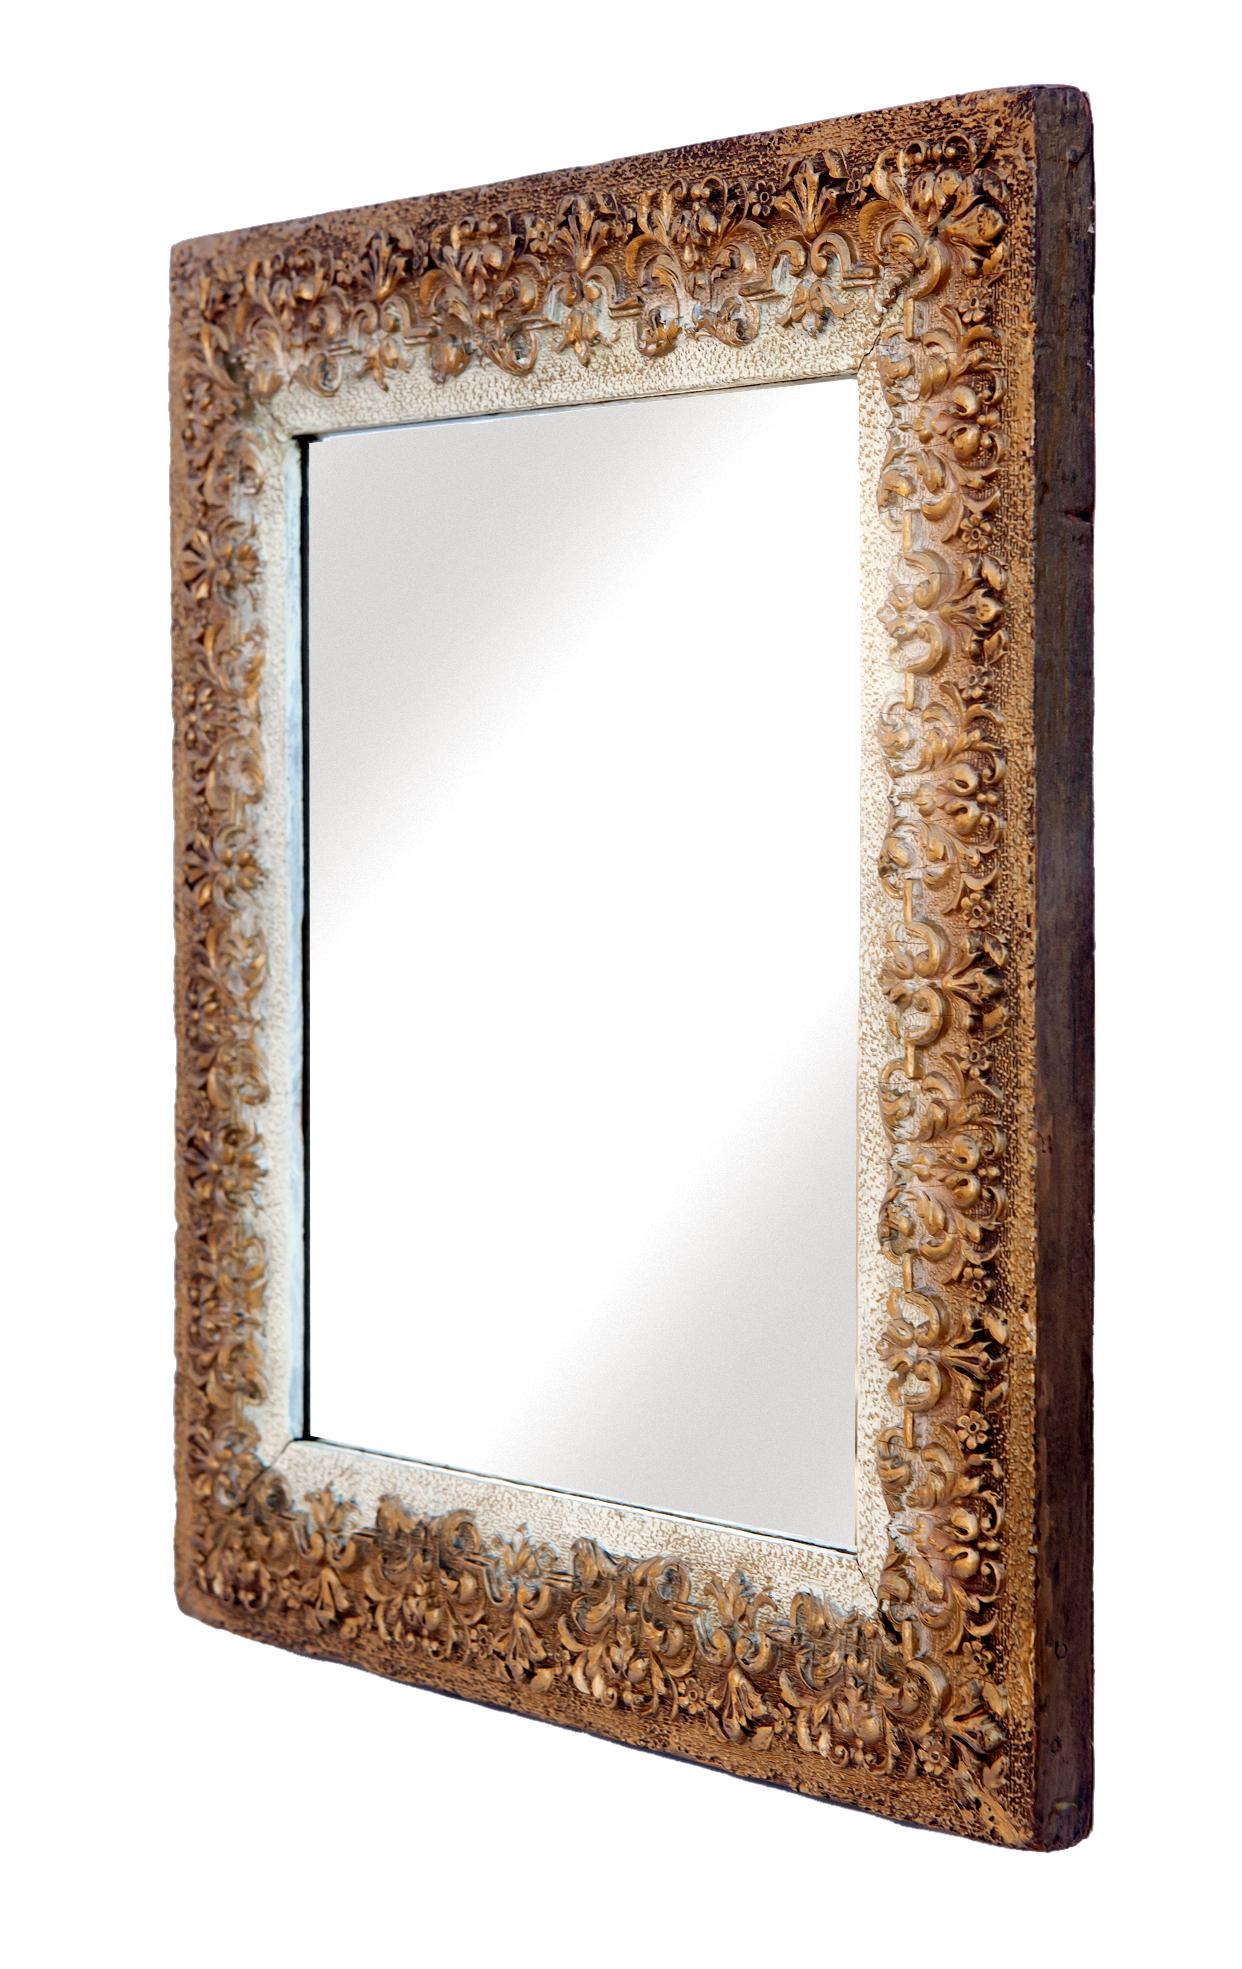 This mirror has a very fine and intricate repeat pattern of leaves flowers and scrolls offset by a textured cream background. The dark tones on the exterior border leads the eye in toward the center and whatever is reflected in the glass. New